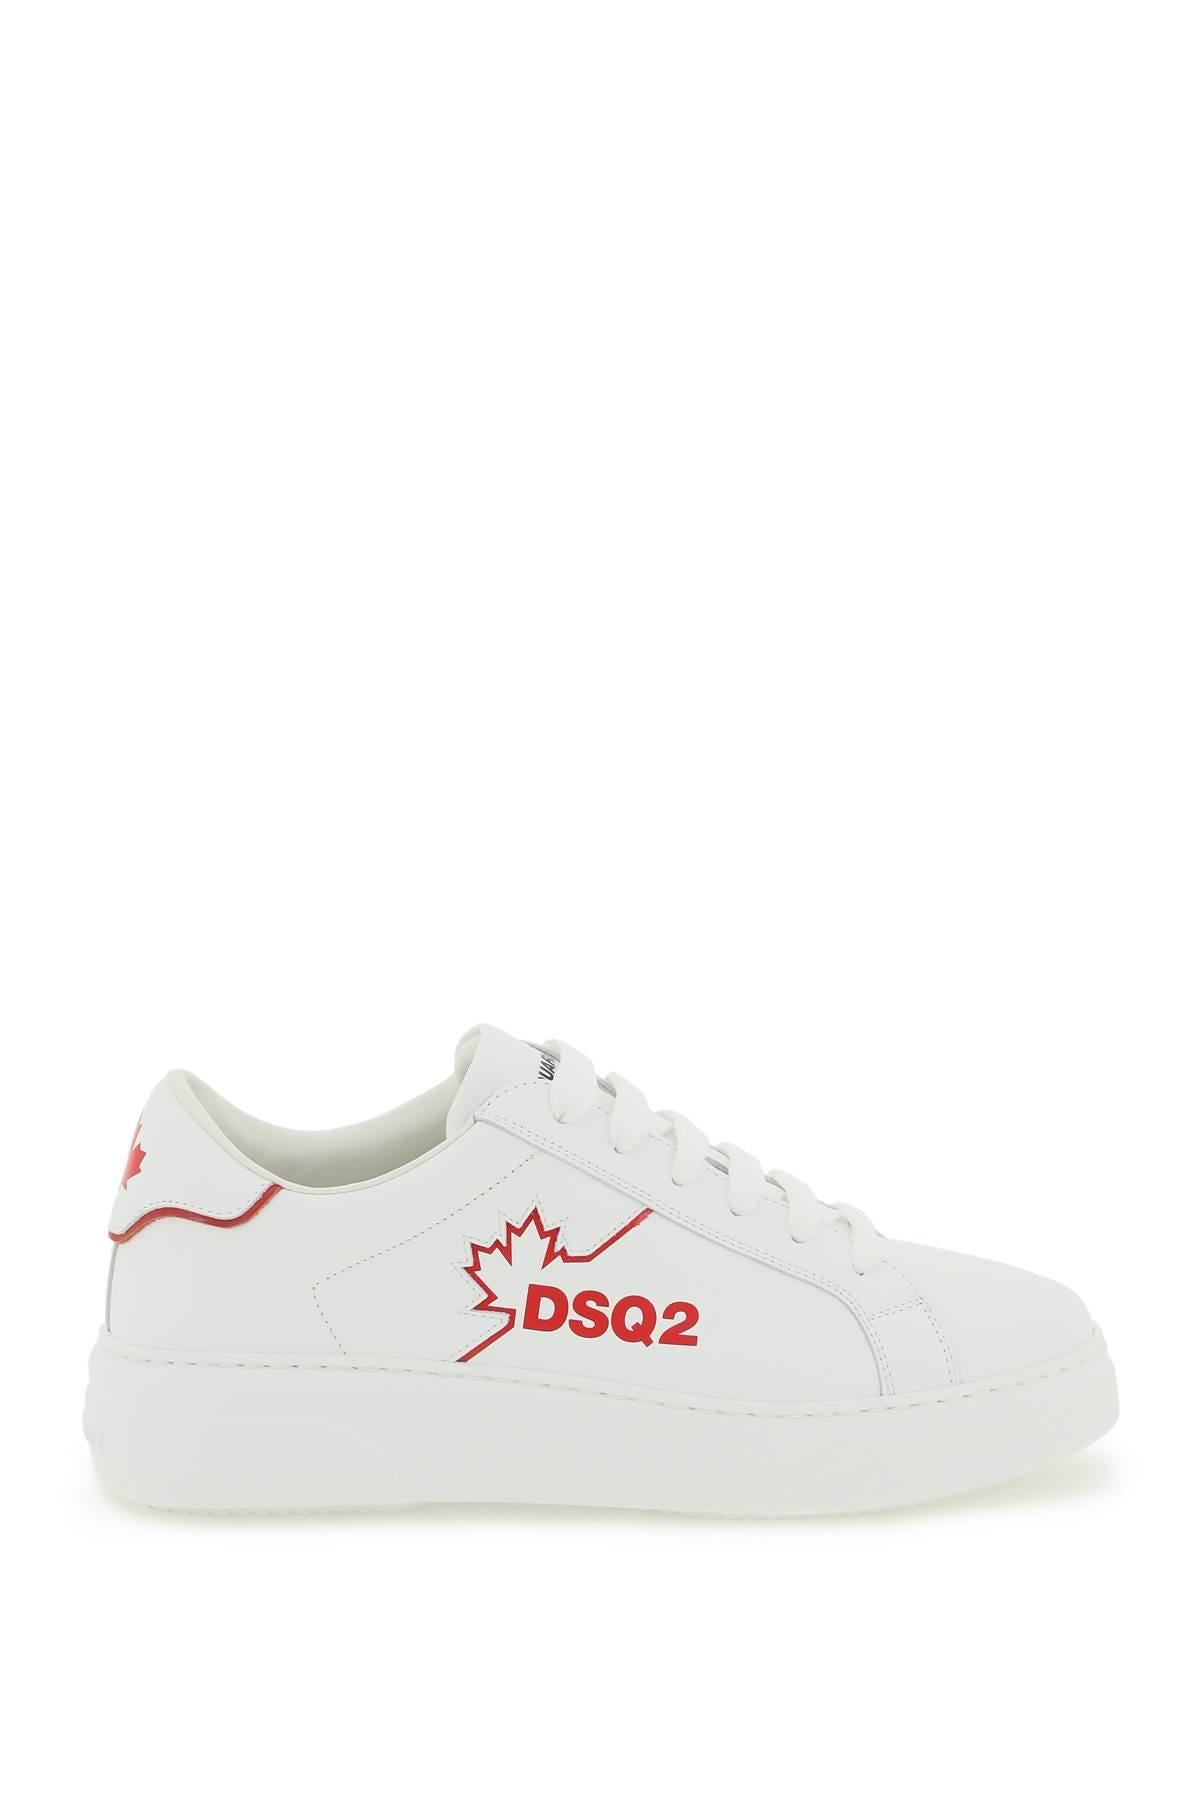 DSquared² 'bumper' Sneakers in White for Men Lyst